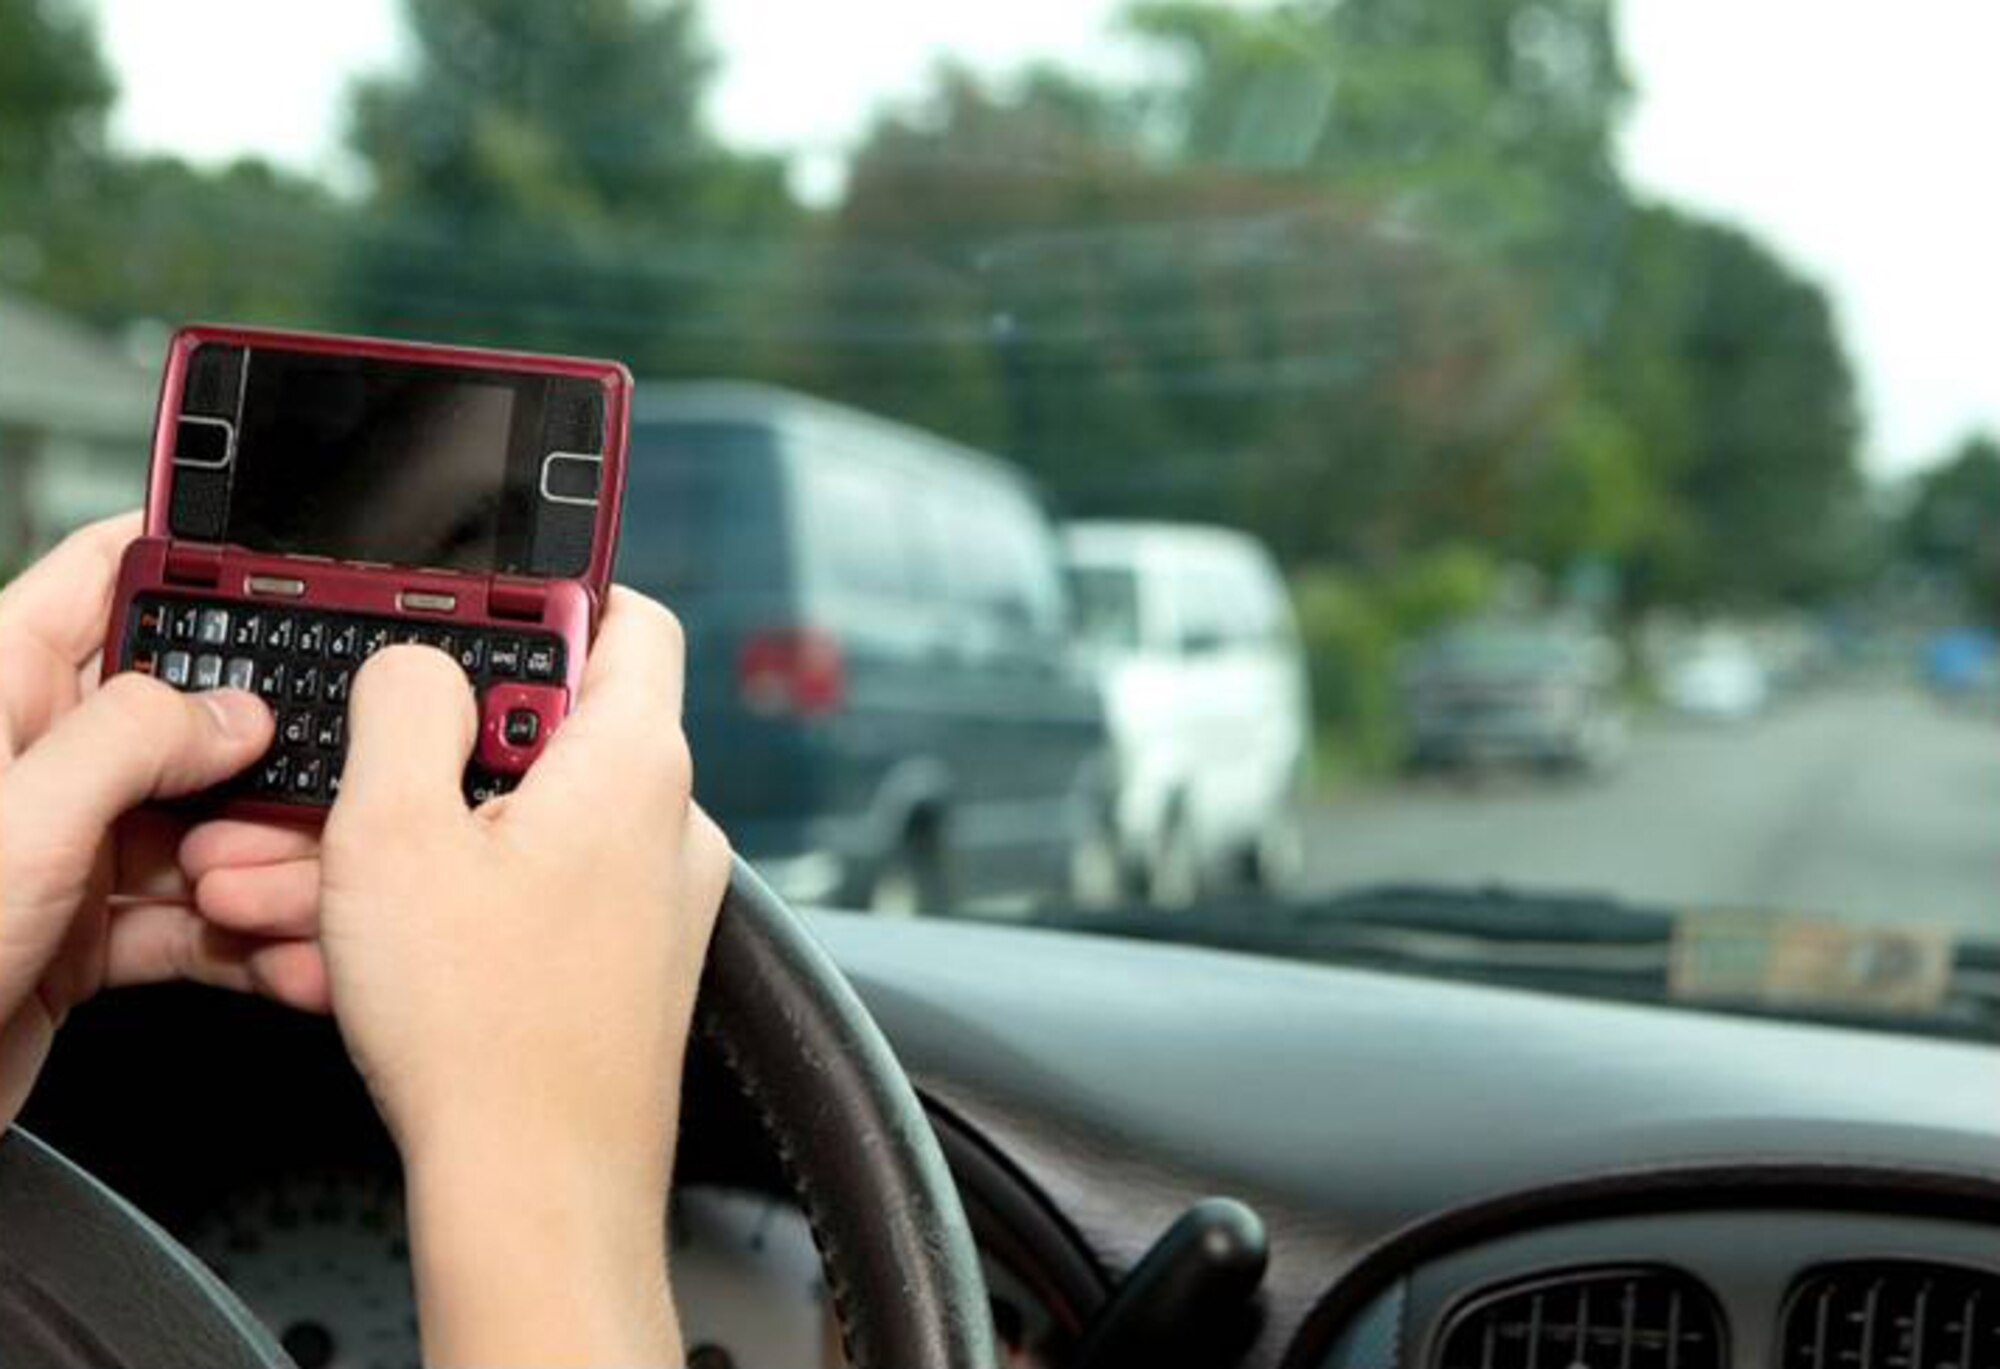 Nevada’s Distracted Driver Law, which bans the majority of cell phone usage while operating a motor vehicle, will go into effect Oct. 1, 2011. (courtesy photo)